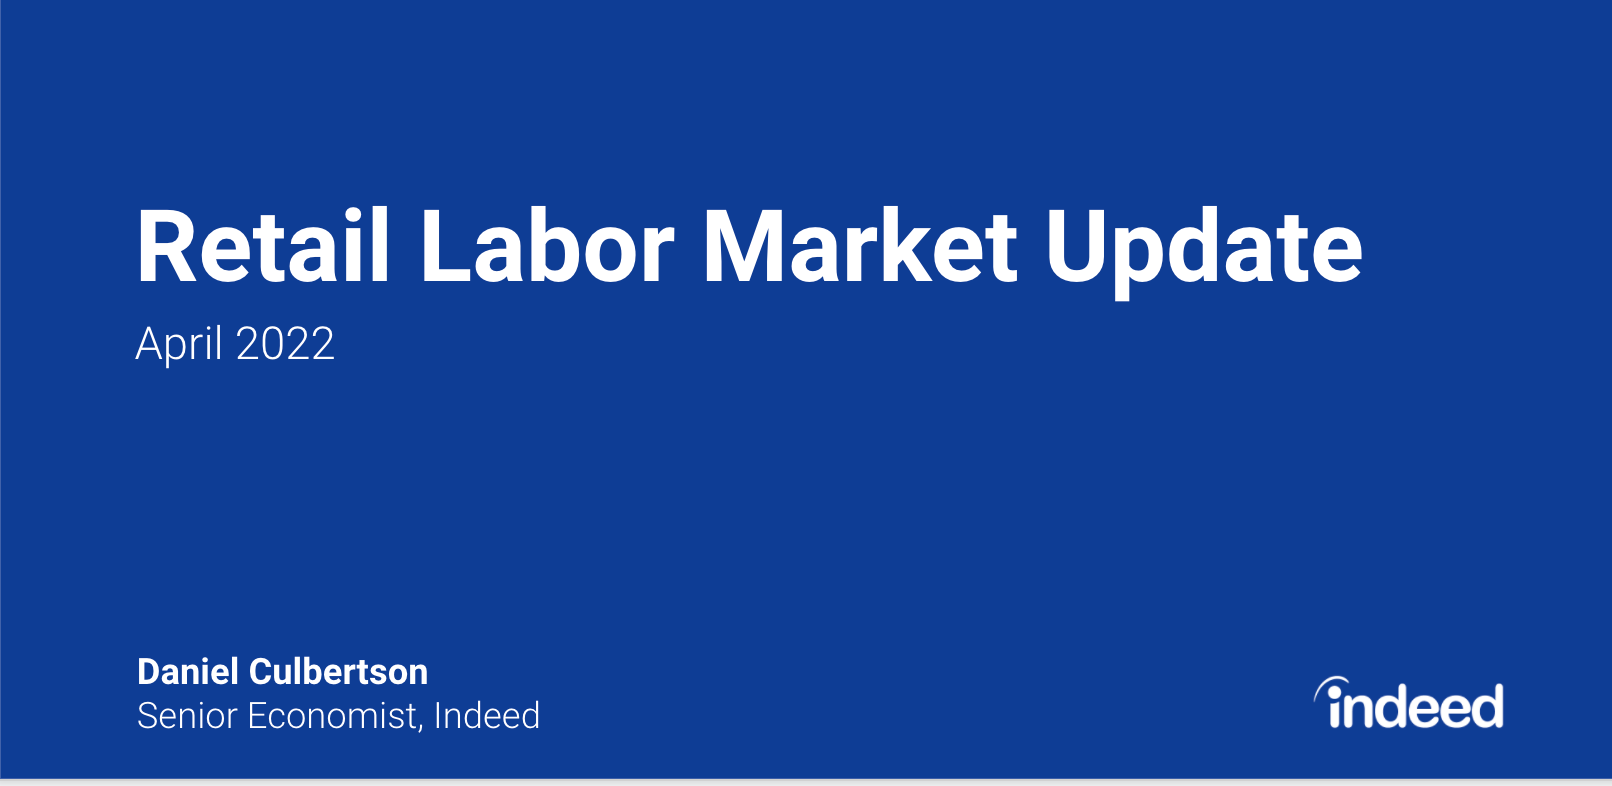 Header photo with the title "Retail Labor Market Update"